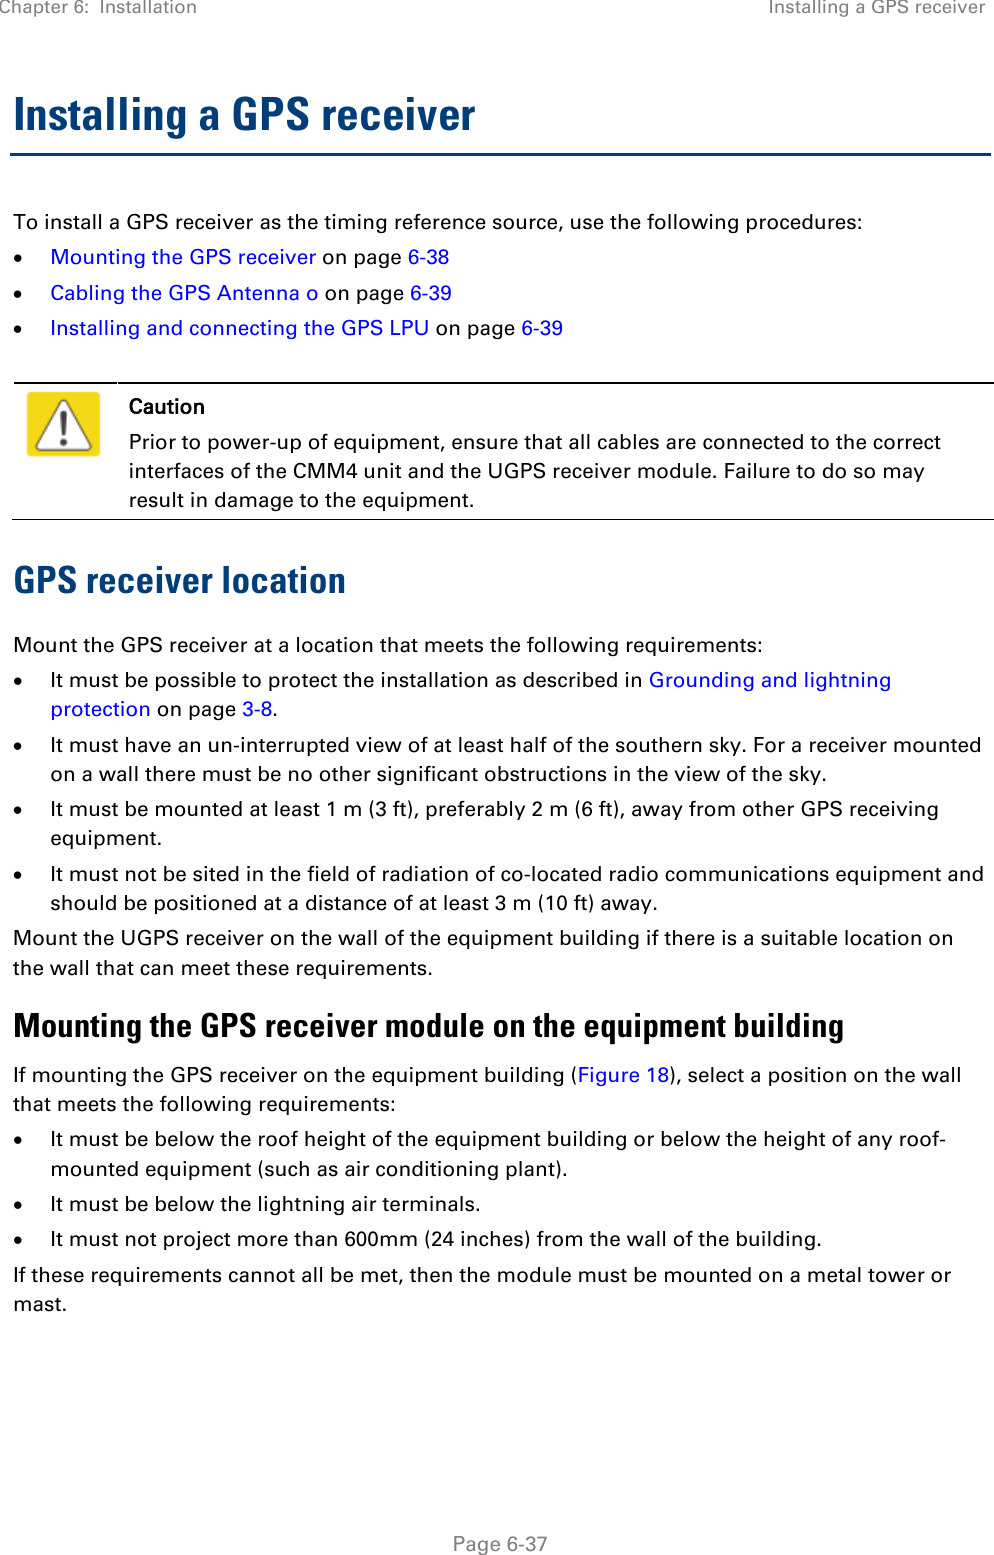 Chapter 6:  Installation Installing a GPS receiver   Page 6-37 Installing a GPS receiver To install a GPS receiver as the timing reference source, use the following procedures: • Mounting the GPS receiver on page 6-38 • Cabling the GPS Antenna o on page 6-39 • Installing and connecting the GPS LPU on page 6-39   Caution Prior to power-up of equipment, ensure that all cables are connected to the correct interfaces of the CMM4 unit and the UGPS receiver module. Failure to do so may result in damage to the equipment. GPS receiver location Mount the GPS receiver at a location that meets the following requirements: • It must be possible to protect the installation as described in Grounding and lightning protection on page 3-8. • It must have an un-interrupted view of at least half of the southern sky. For a receiver mounted on a wall there must be no other significant obstructions in the view of the sky. • It must be mounted at least 1 m (3 ft), preferably 2 m (6 ft), away from other GPS receiving equipment. • It must not be sited in the field of radiation of co-located radio communications equipment and should be positioned at a distance of at least 3 m (10 ft) away. Mount the UGPS receiver on the wall of the equipment building if there is a suitable location on the wall that can meet these requirements.  Mounting the GPS receiver module on the equipment building If mounting the GPS receiver on the equipment building (Figure 18), select a position on the wall that meets the following requirements: • It must be below the roof height of the equipment building or below the height of any roof-mounted equipment (such as air conditioning plant). • It must be below the lightning air terminals. • It must not project more than 600mm (24 inches) from the wall of the building. If these requirements cannot all be met, then the module must be mounted on a metal tower or mast. 